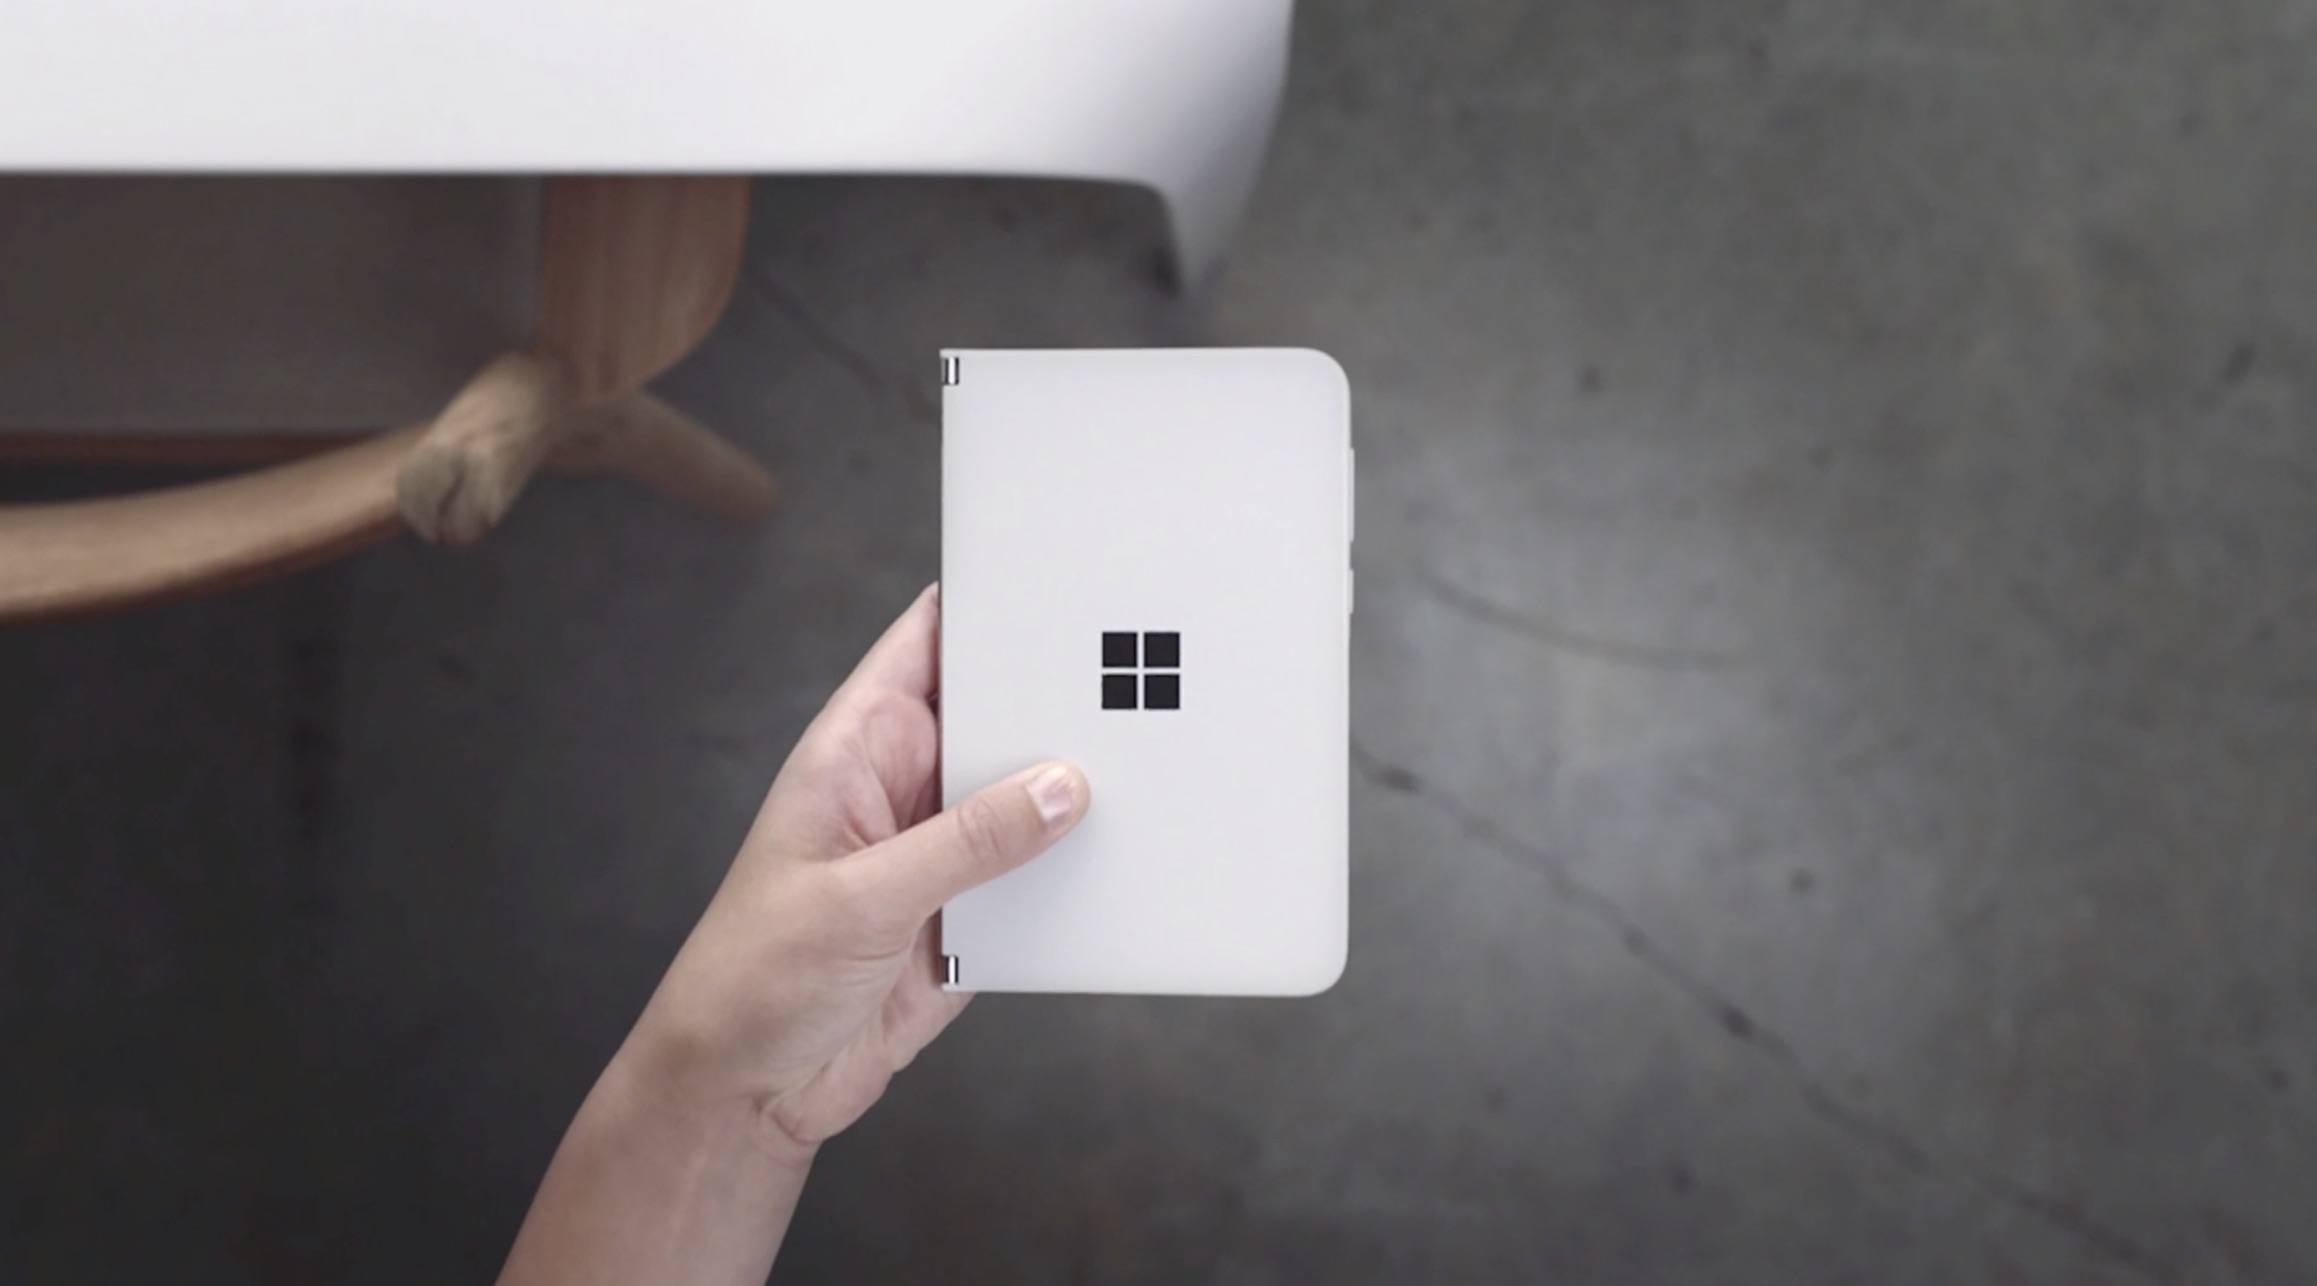 microsoft surface neo closed in hand